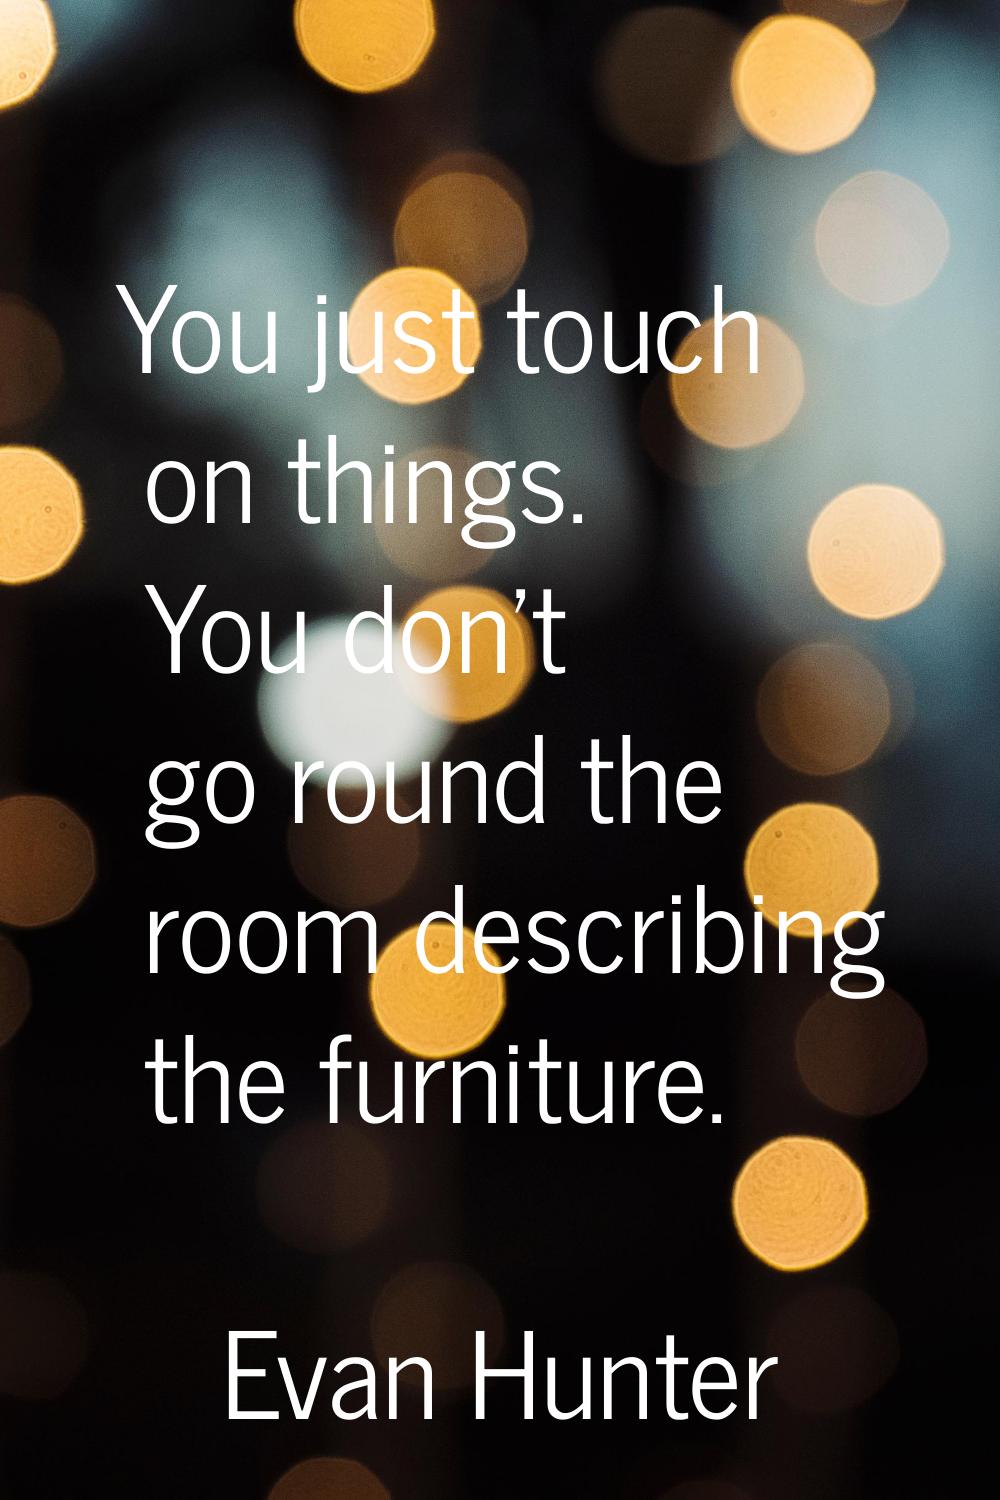 You just touch on things. You don't go round the room describing the furniture.